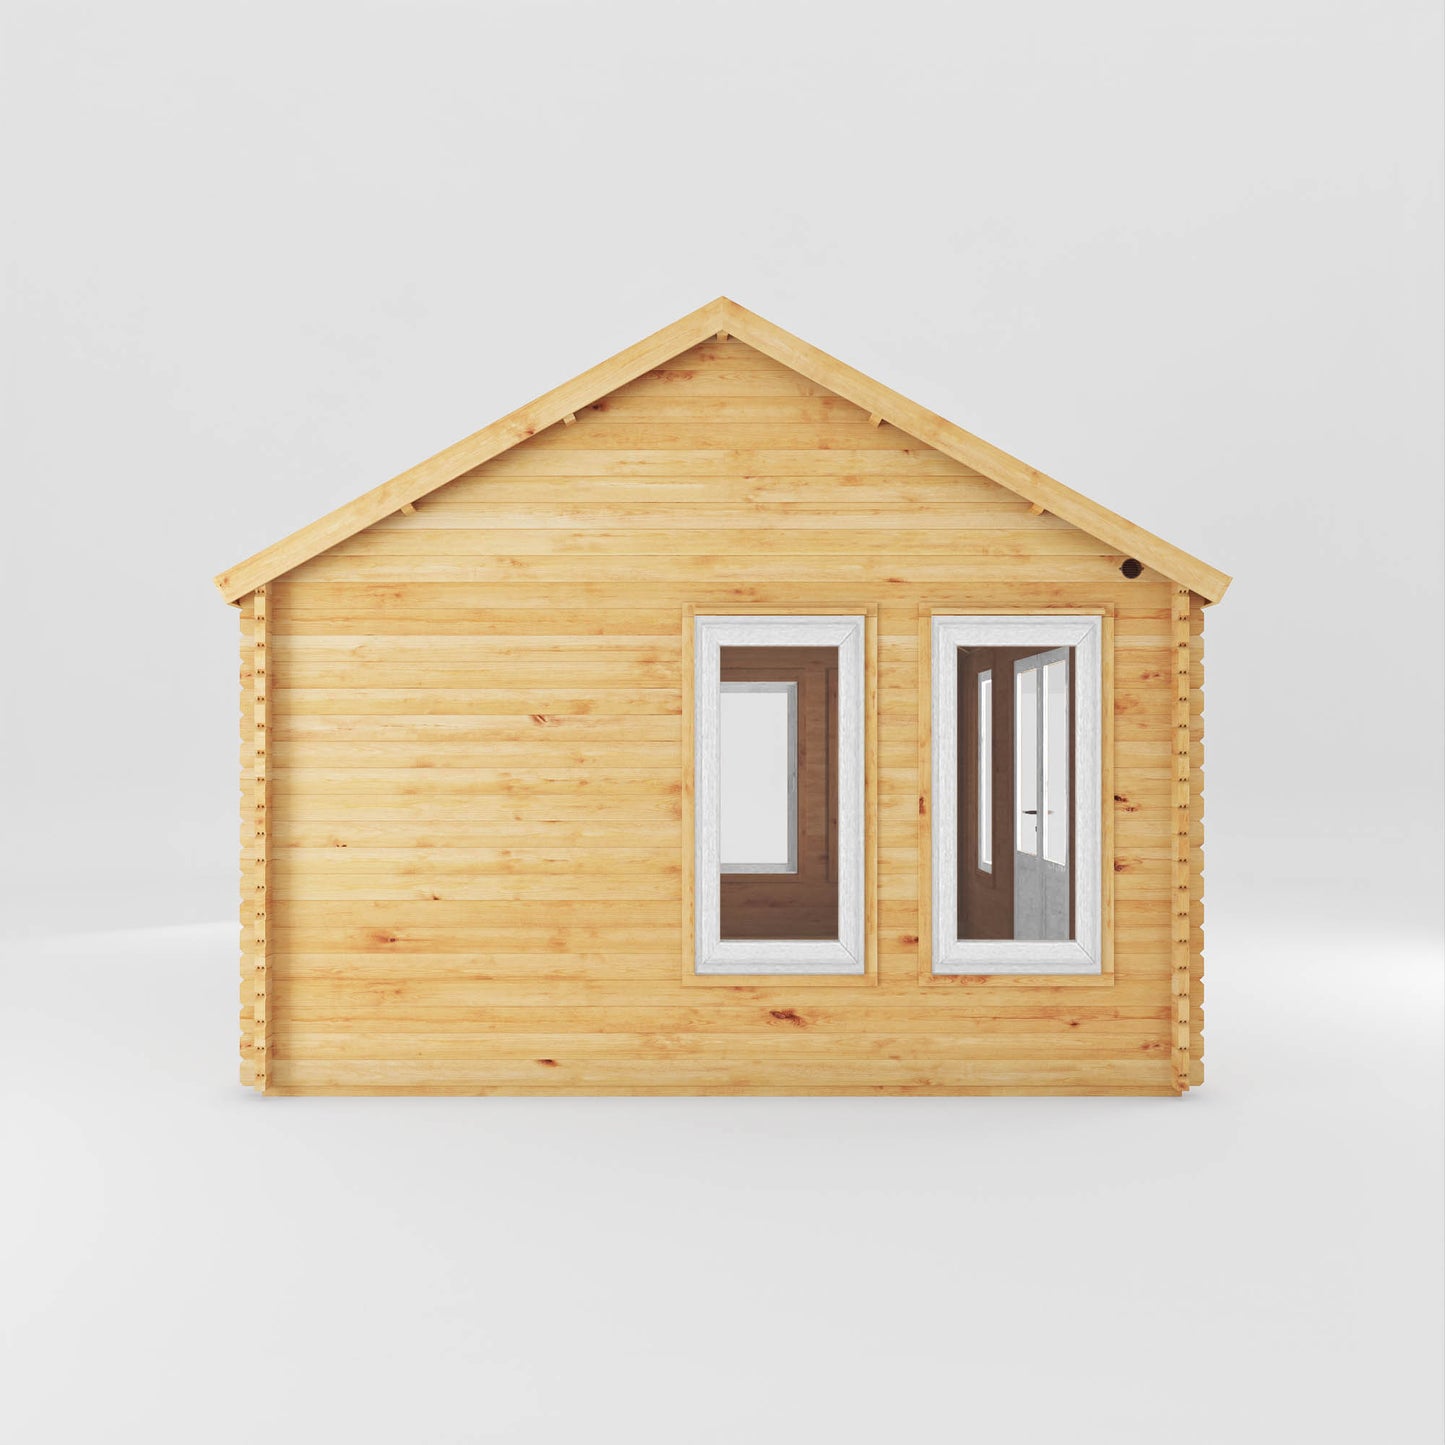 The 5.3m x 4m Grouse Log Cabin with White UPVC